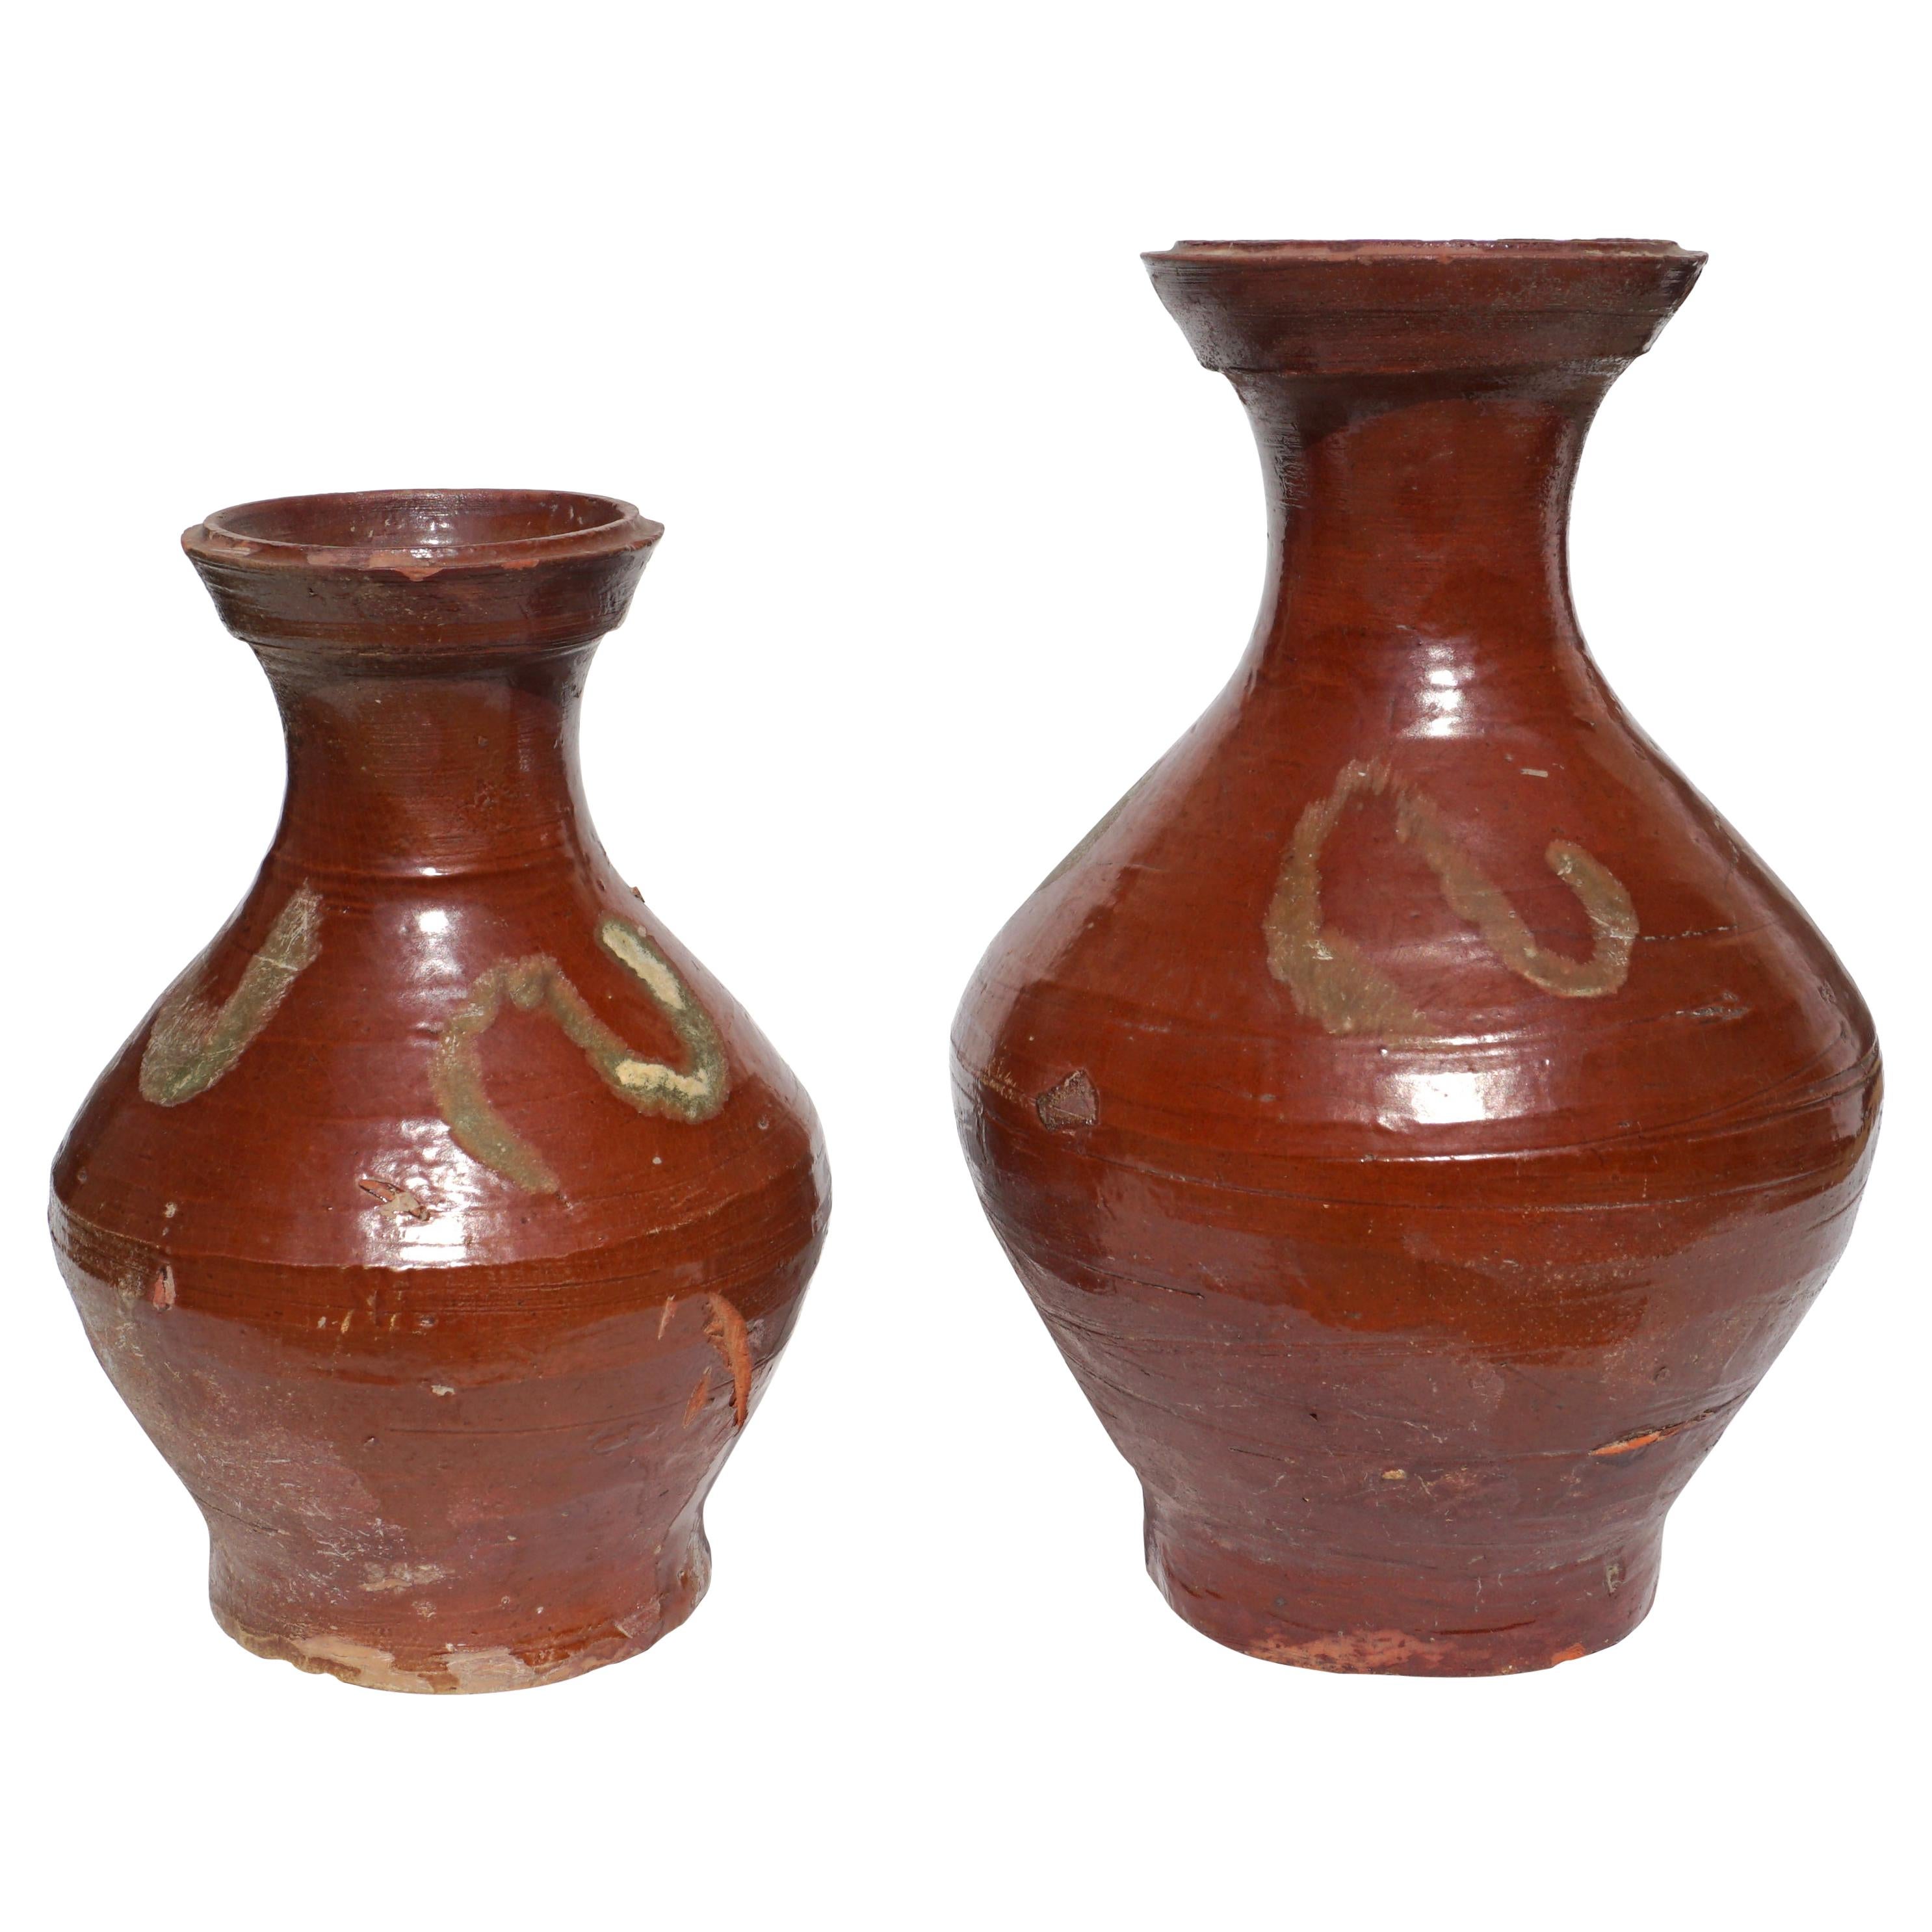 Tang Dynasty Glazed Pottery Ox Blood Jars 618-907 AD For Sale